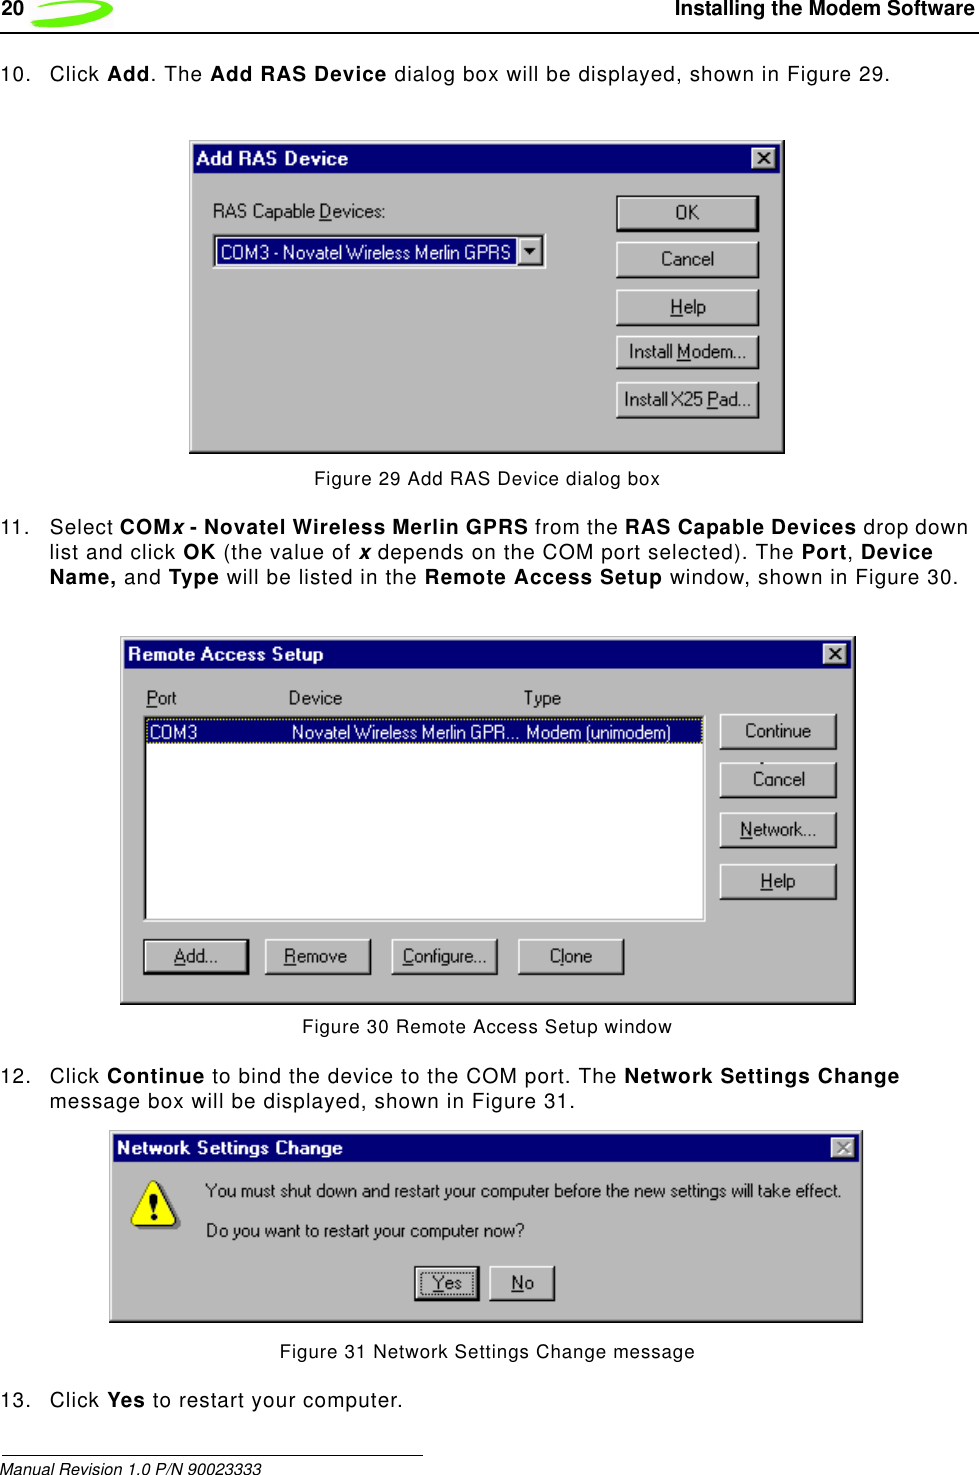 20  Installing the Modem SoftwareManual Revision 1.0 P/N 9002333310. Click Add. The Add RAS Device dialog box will be displayed, shown in Figure 29.Figure 29 Add RAS Device dialog box11. Select COMx - Novatel Wireless Merlin GPRS from the RAS Capable Devices drop down list and click OK (the value of x depends on the COM port selected). The Port, Device Name, and Type will be listed in the Remote Access Setup window, shown in Figure 30.Figure 30 Remote Access Setup window12. Click Continue to bind the device to the COM port. The Network Settings Change message box will be displayed, shown in Figure 31.Figure 31 Network Settings Change message13. Click Yes to restart your computer.